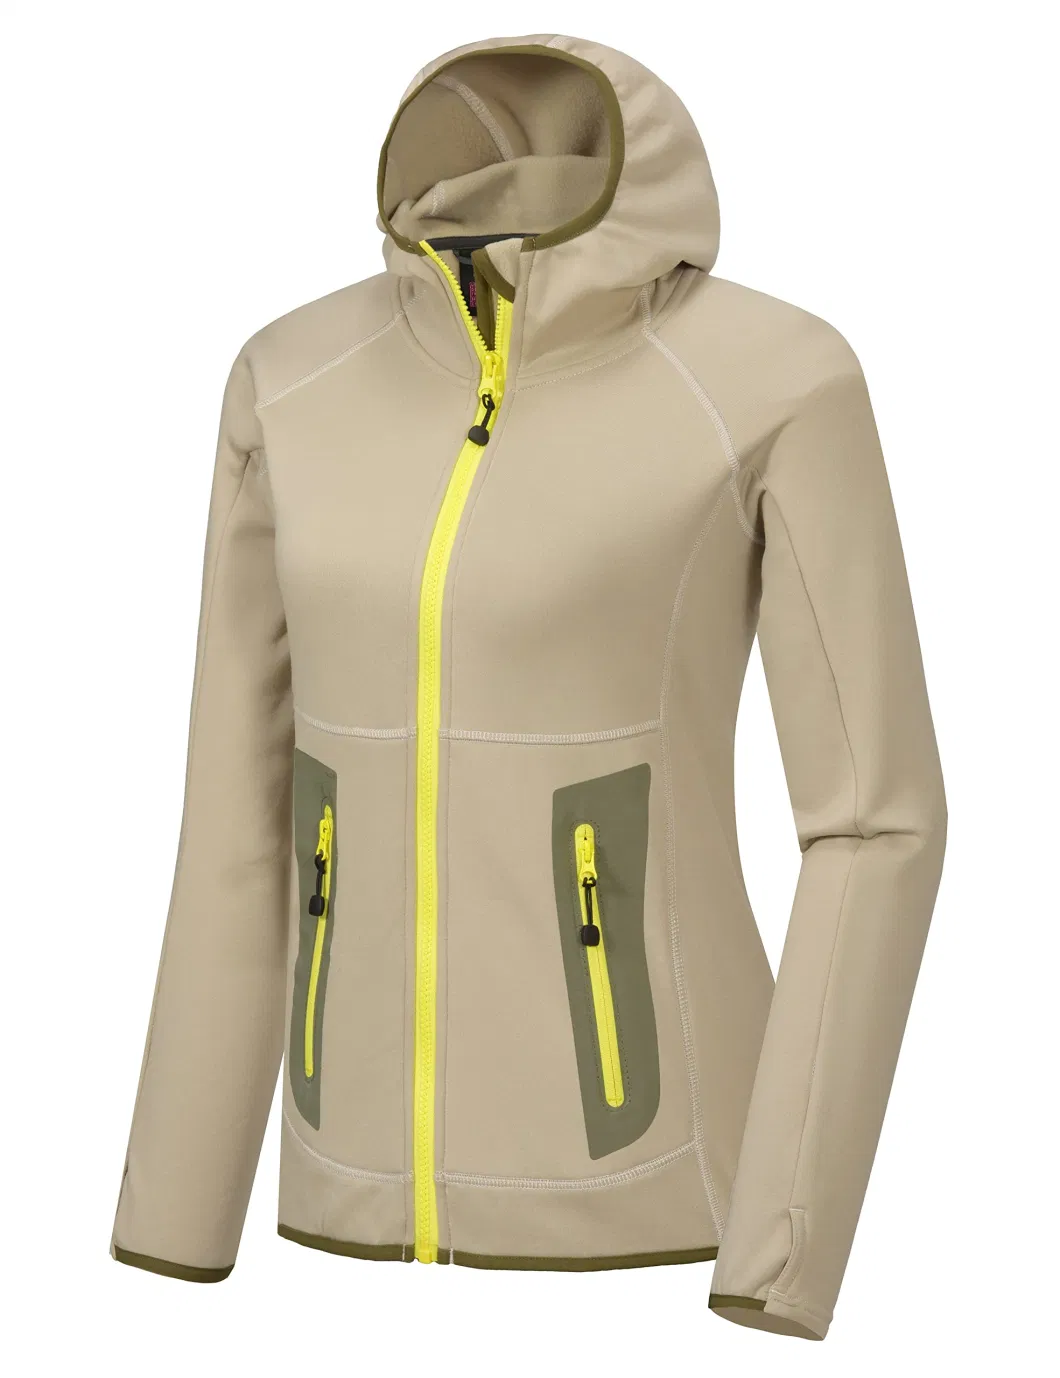 Asiapo China Factory Women&prime;s Softshell Outdoor Sports Jackets with Thumb Holes and Fleece Lined